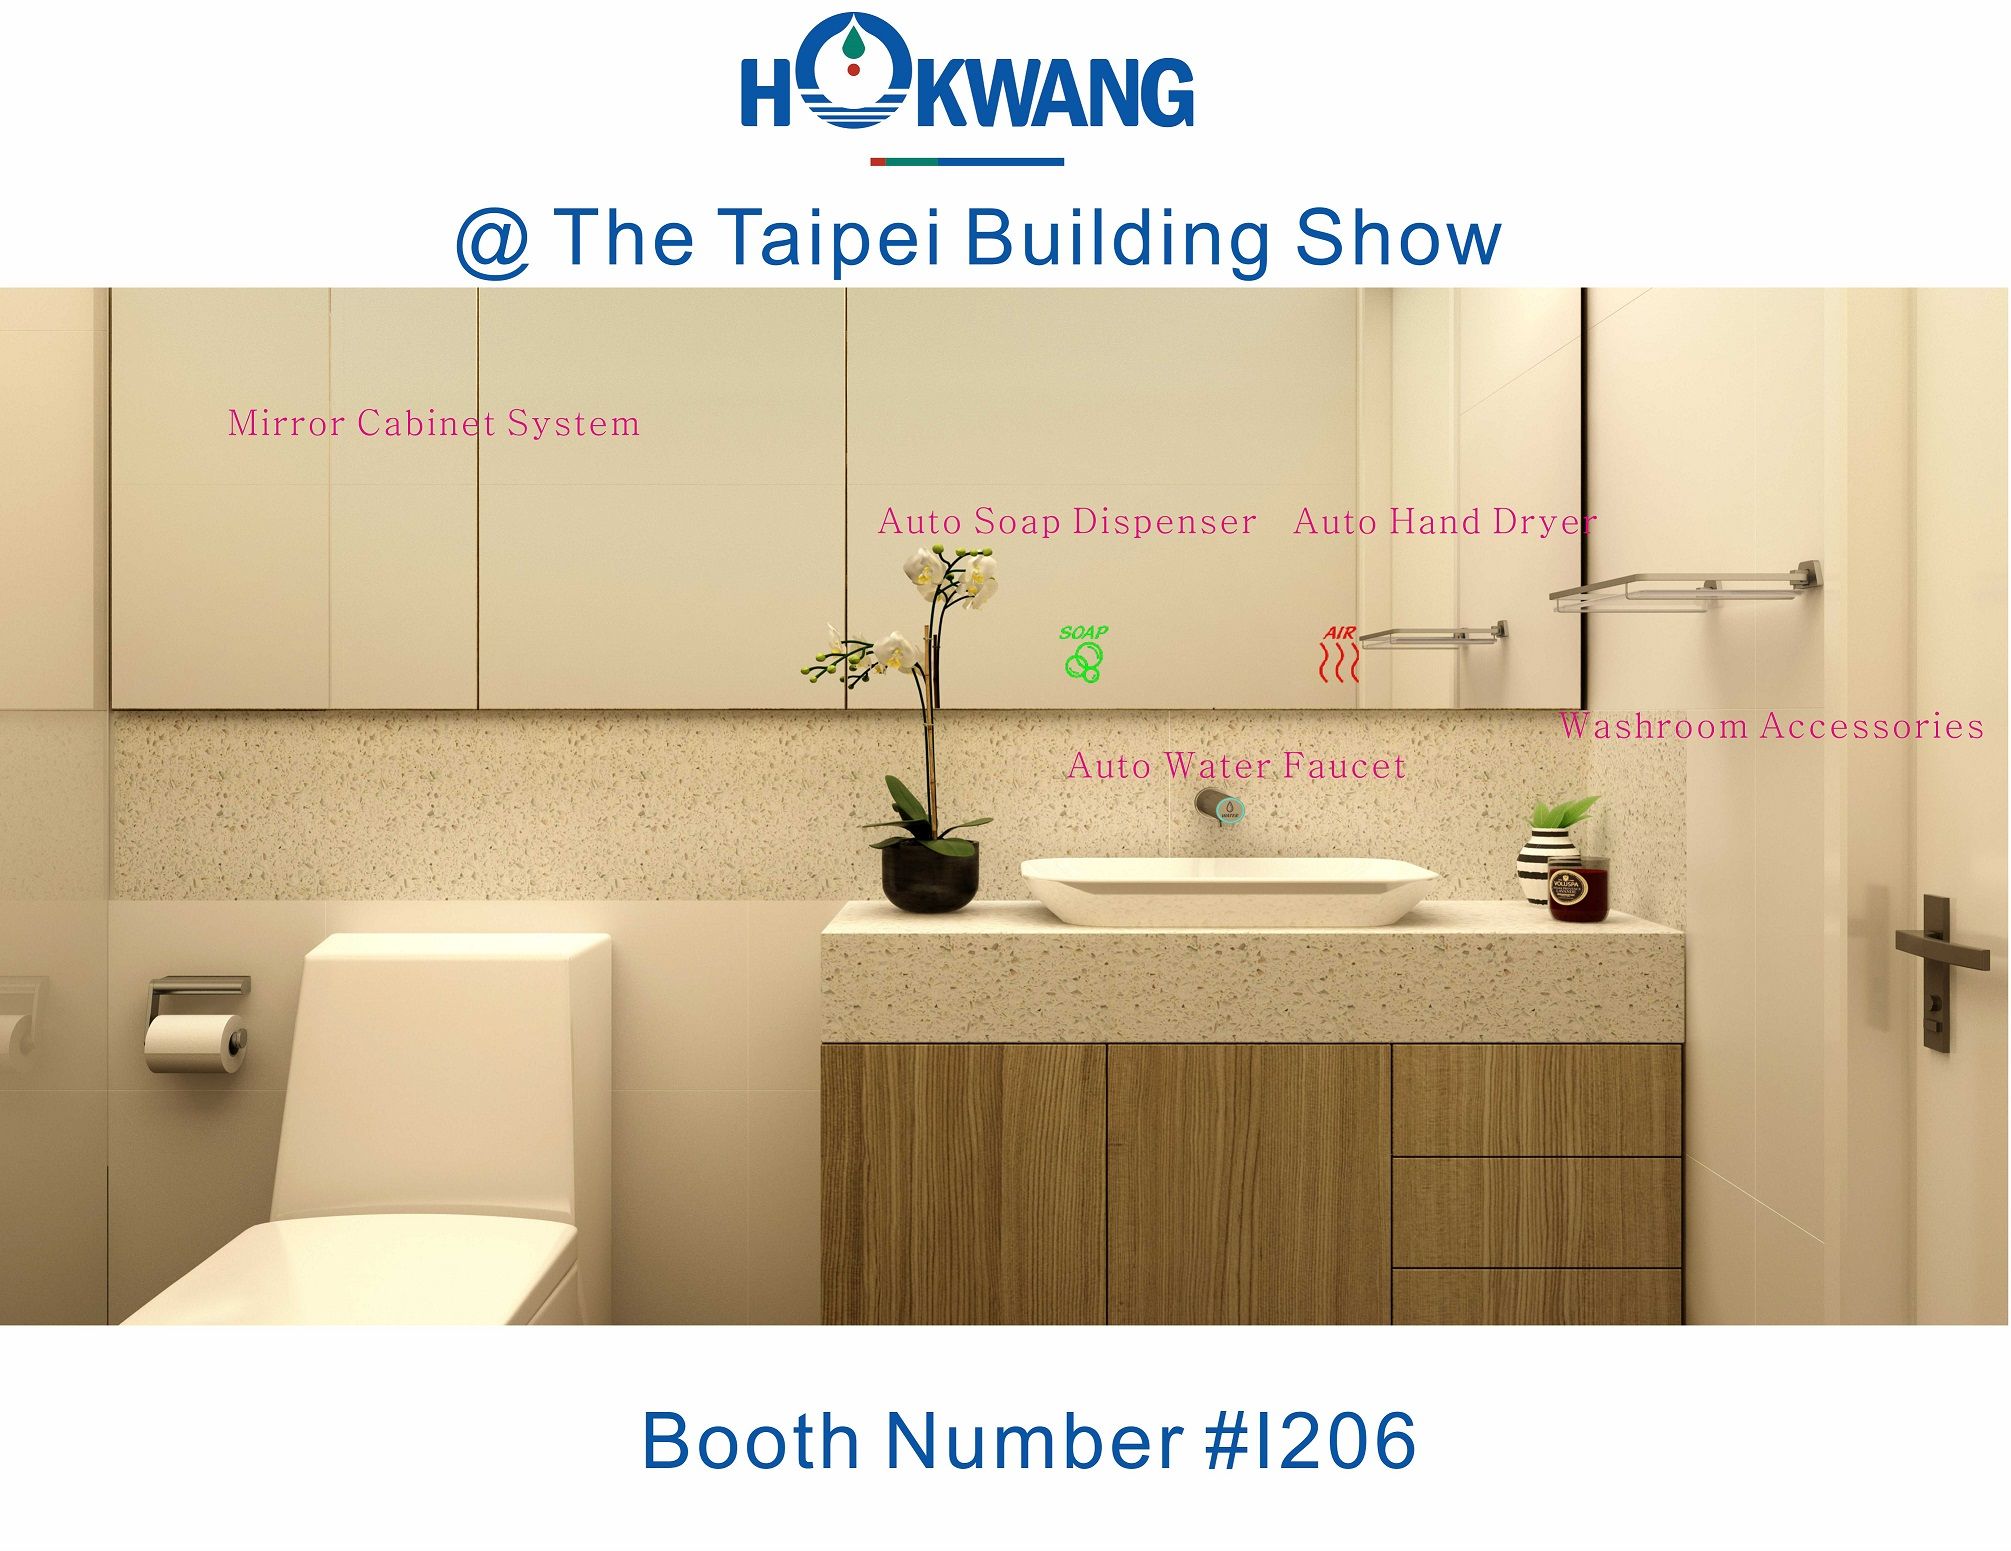 Hokwang will take part in the Taipei Building Show 2018